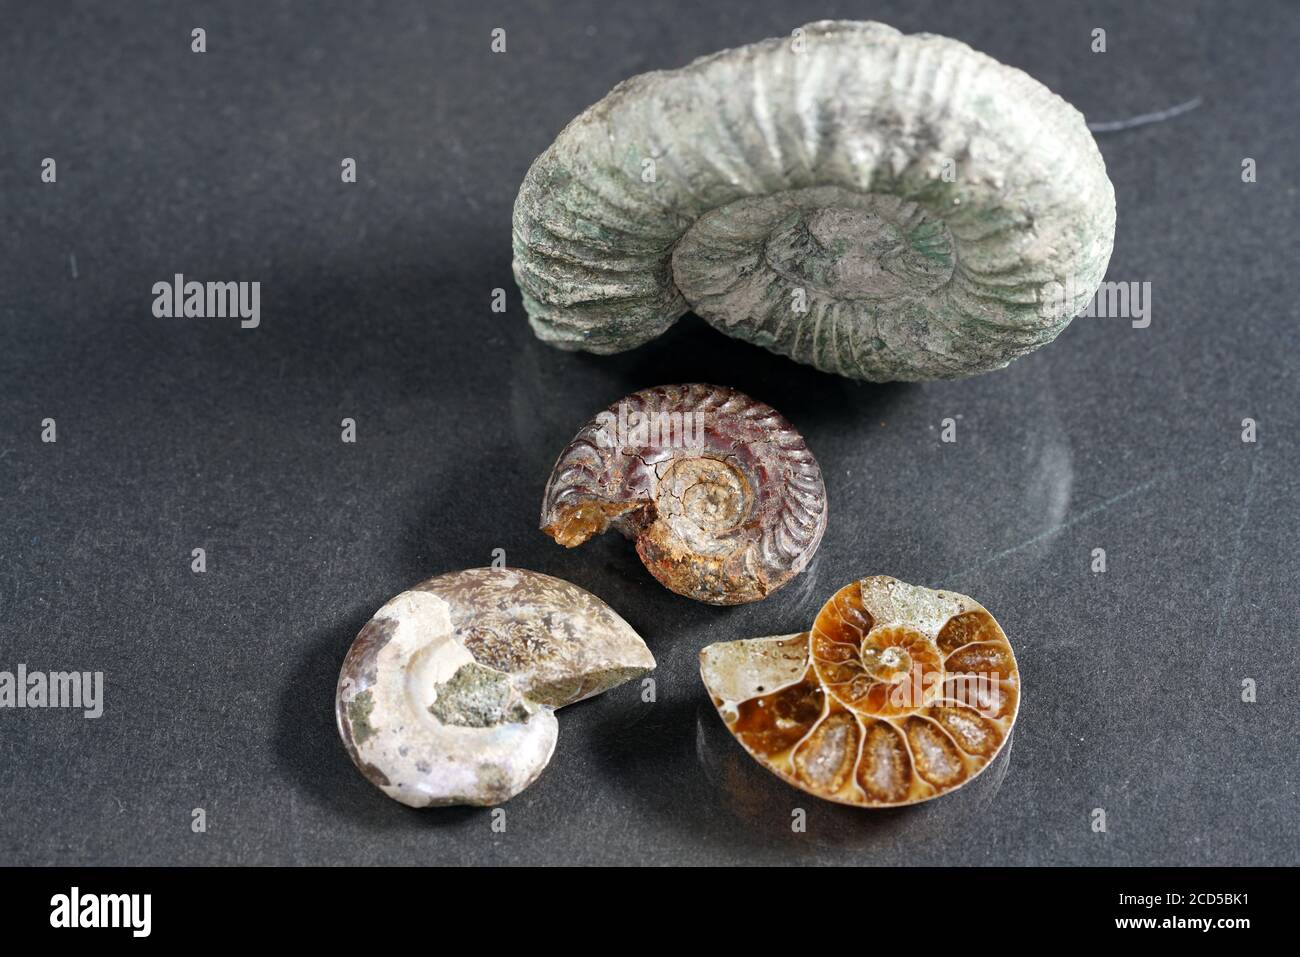 Differently shaped ammonite fossil shells Stock Photo